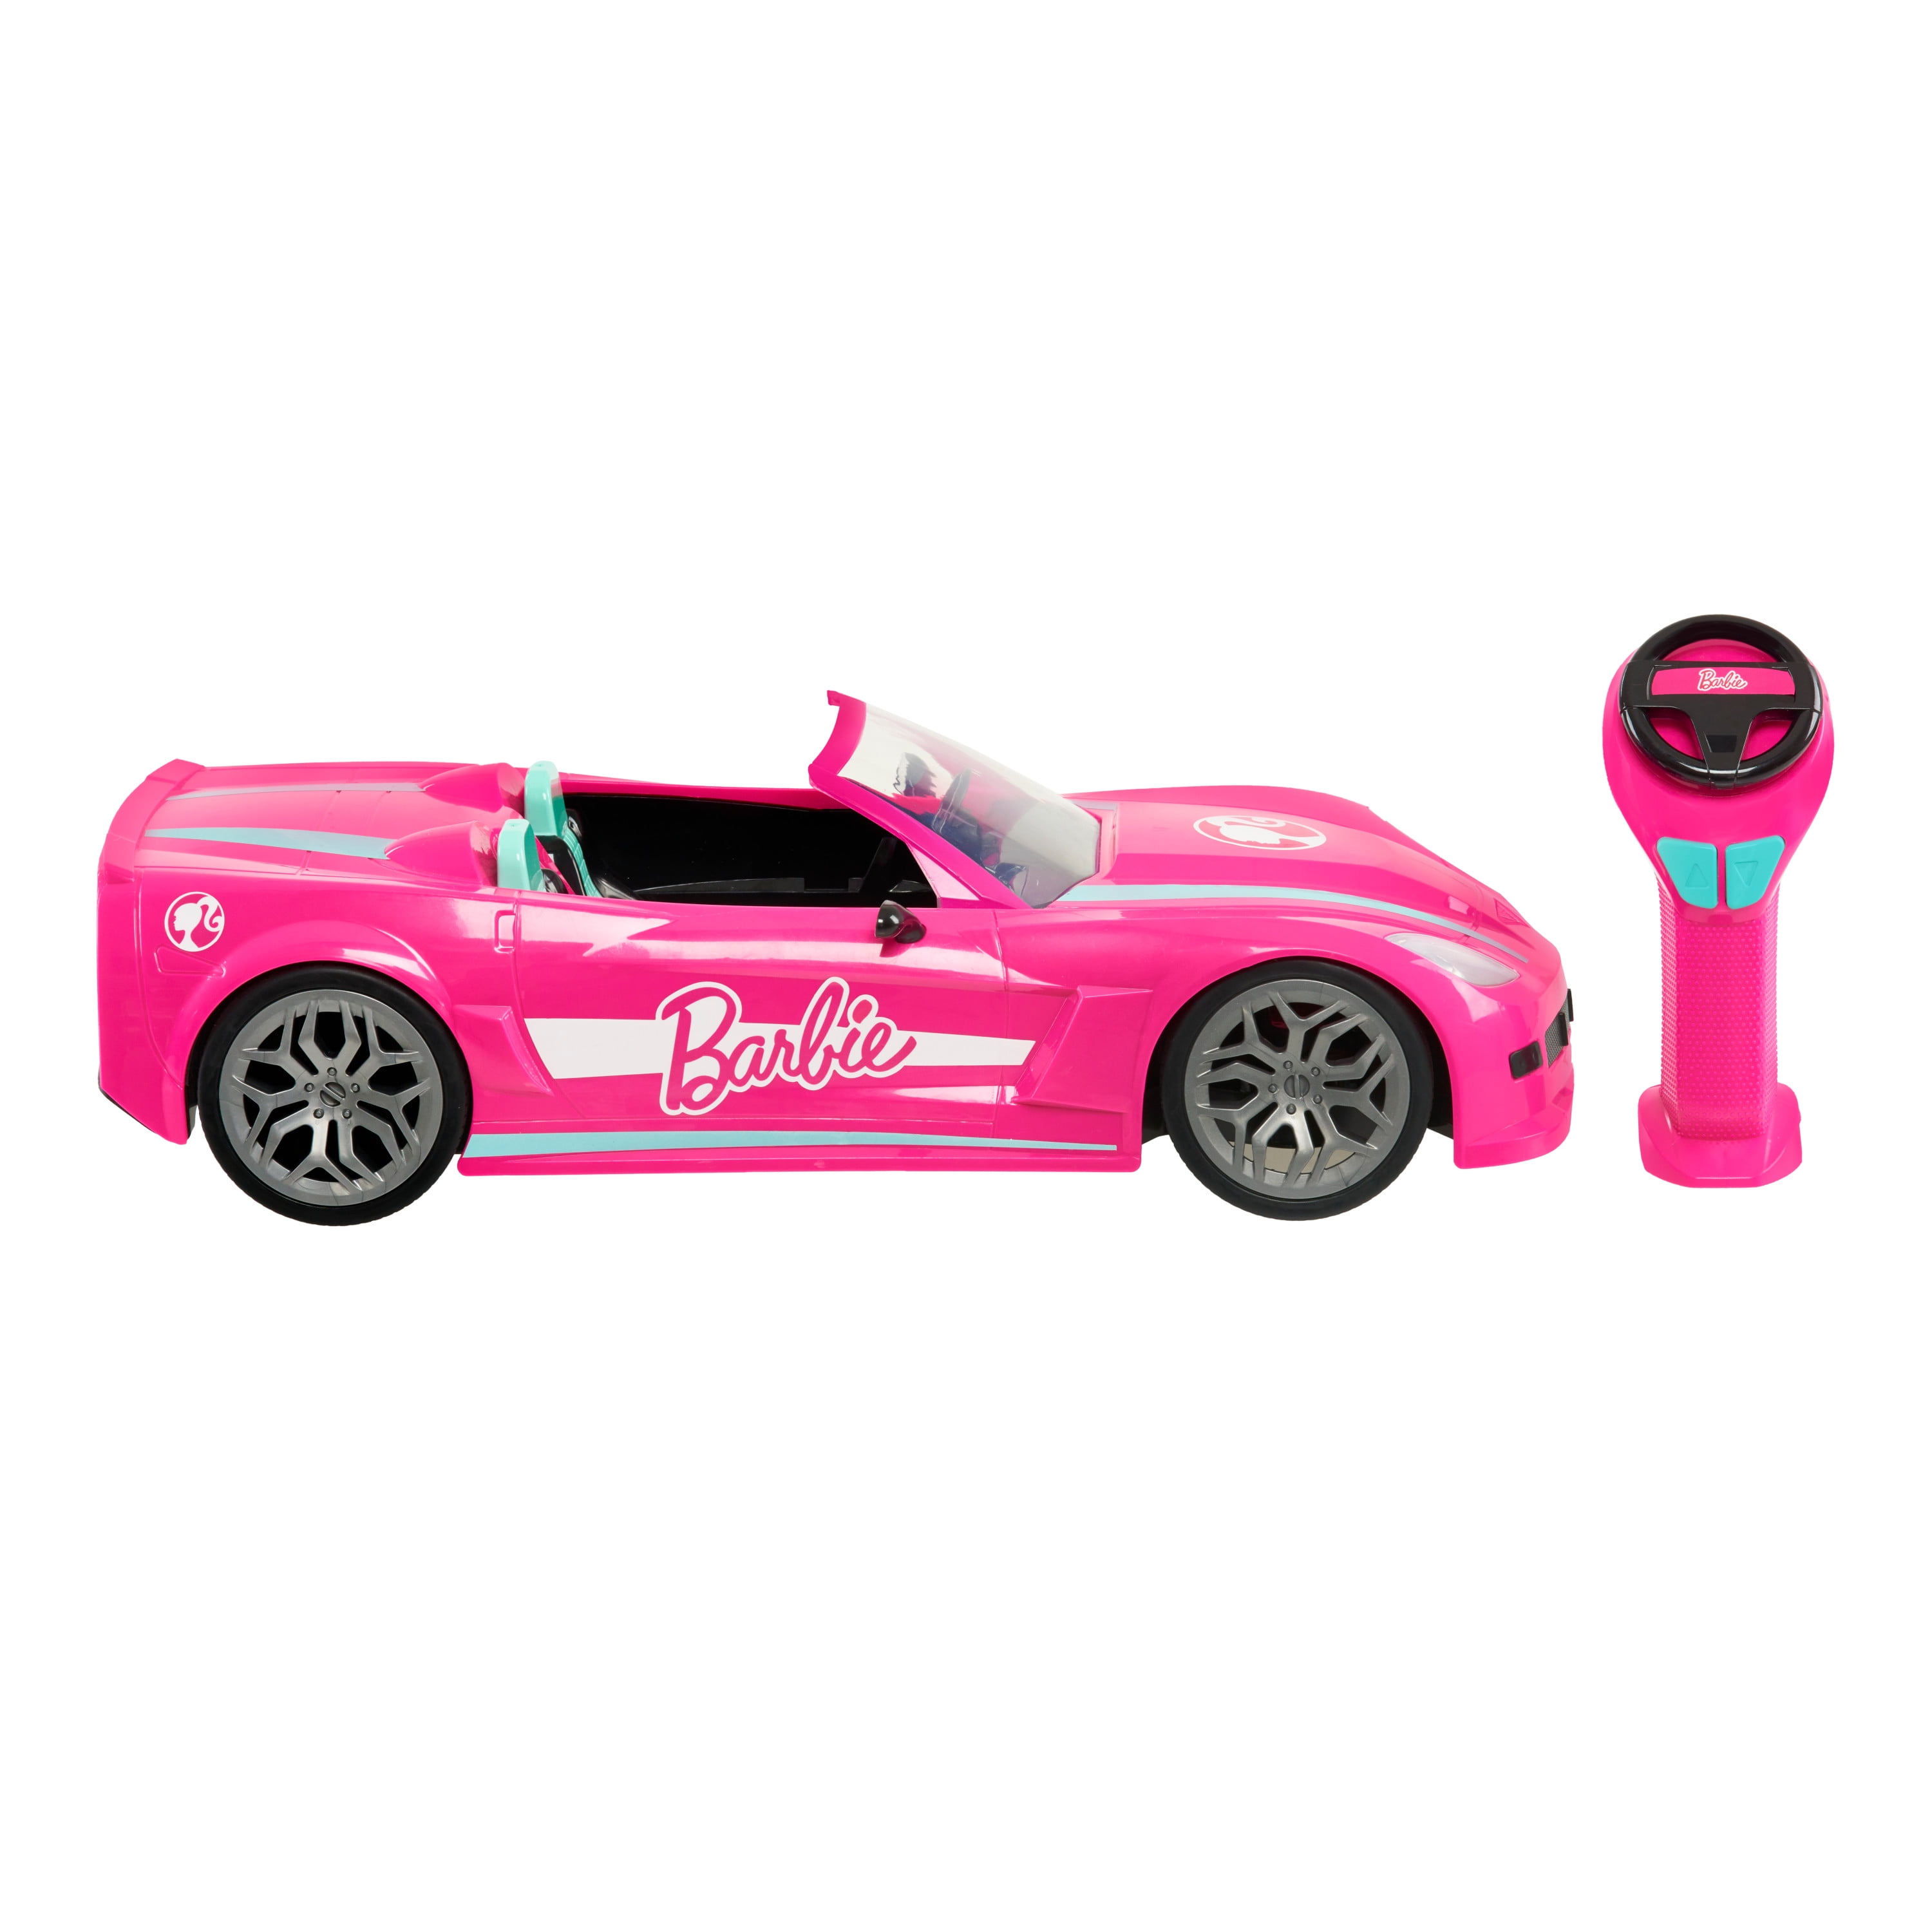 Barbie Remote Control Pink Convertible Car with Lights for Fashion Dolls, Kids Toys for Ages 3 Up, Gifts and Presents - Walmart.com